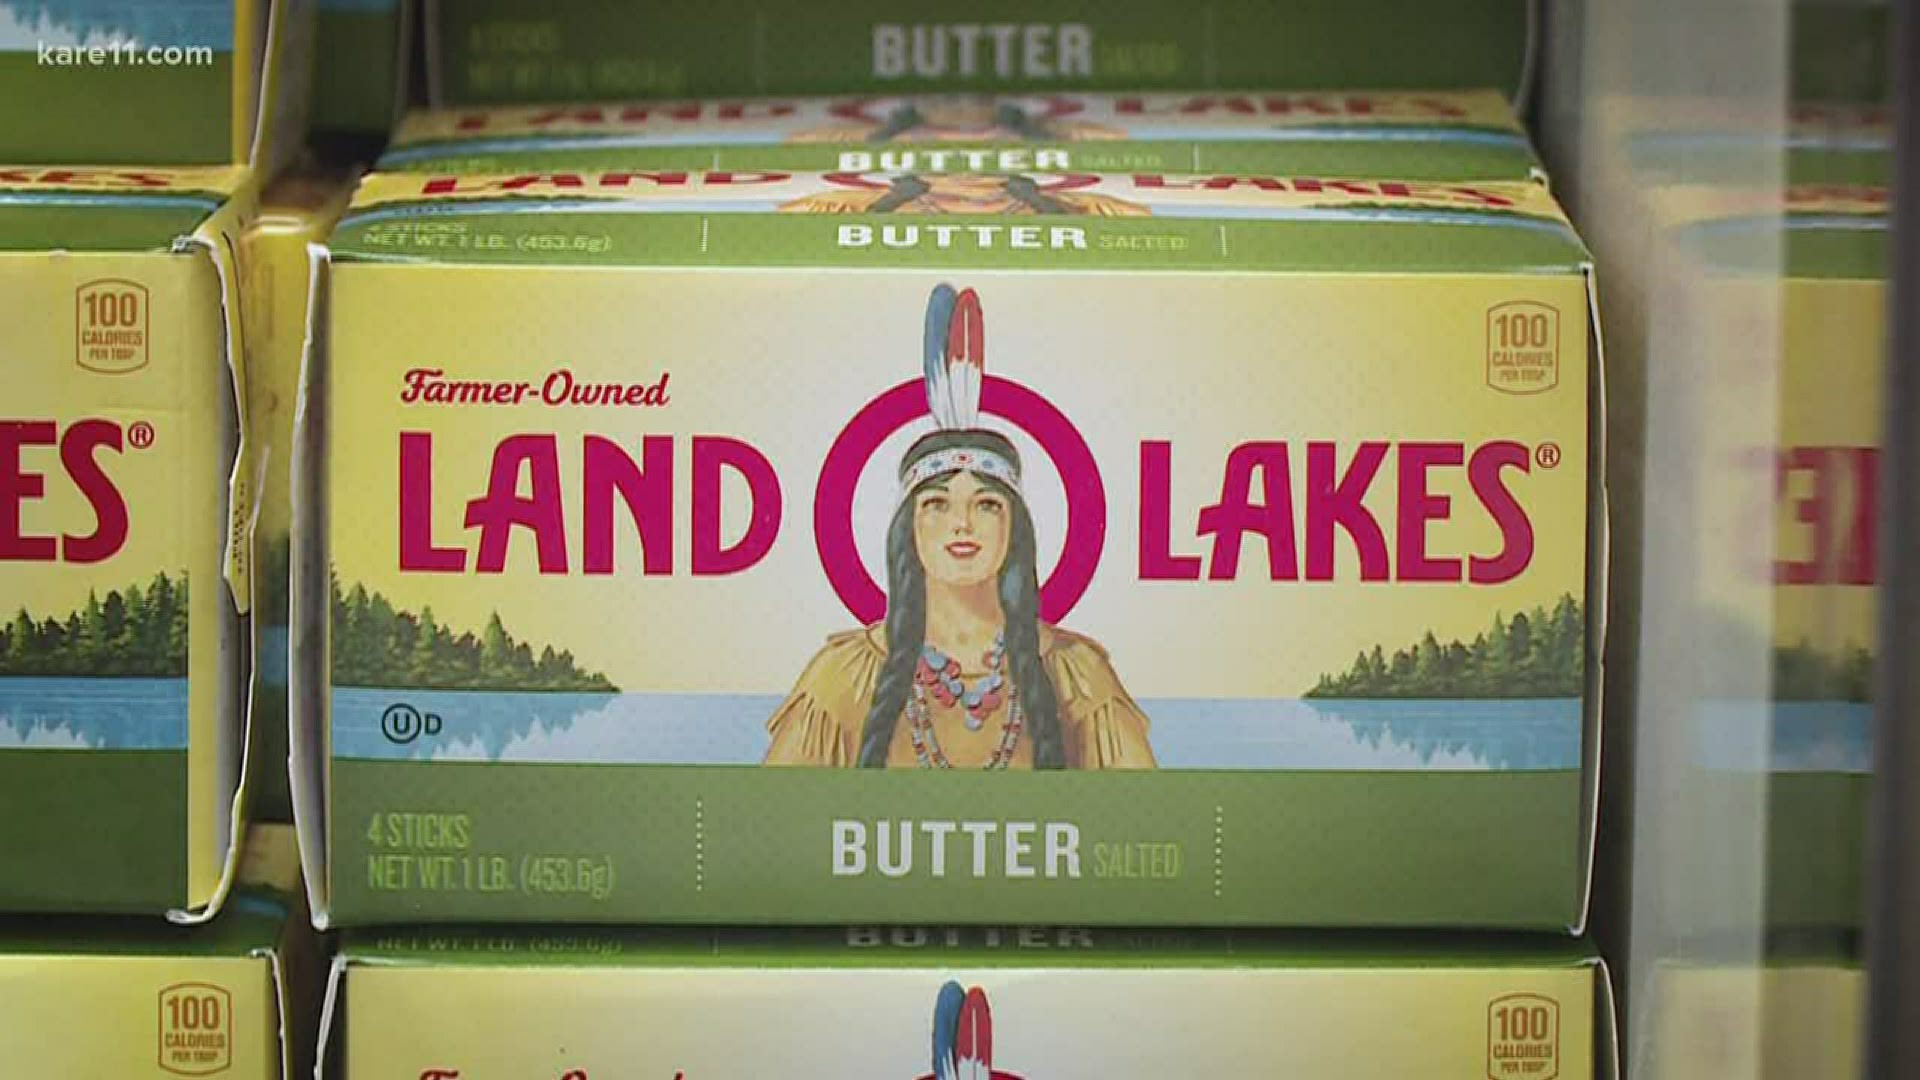 Robert DesJarlait , the son of the artist who created the Land O' Lakes logo, says Native American maiden was never a stereotype.